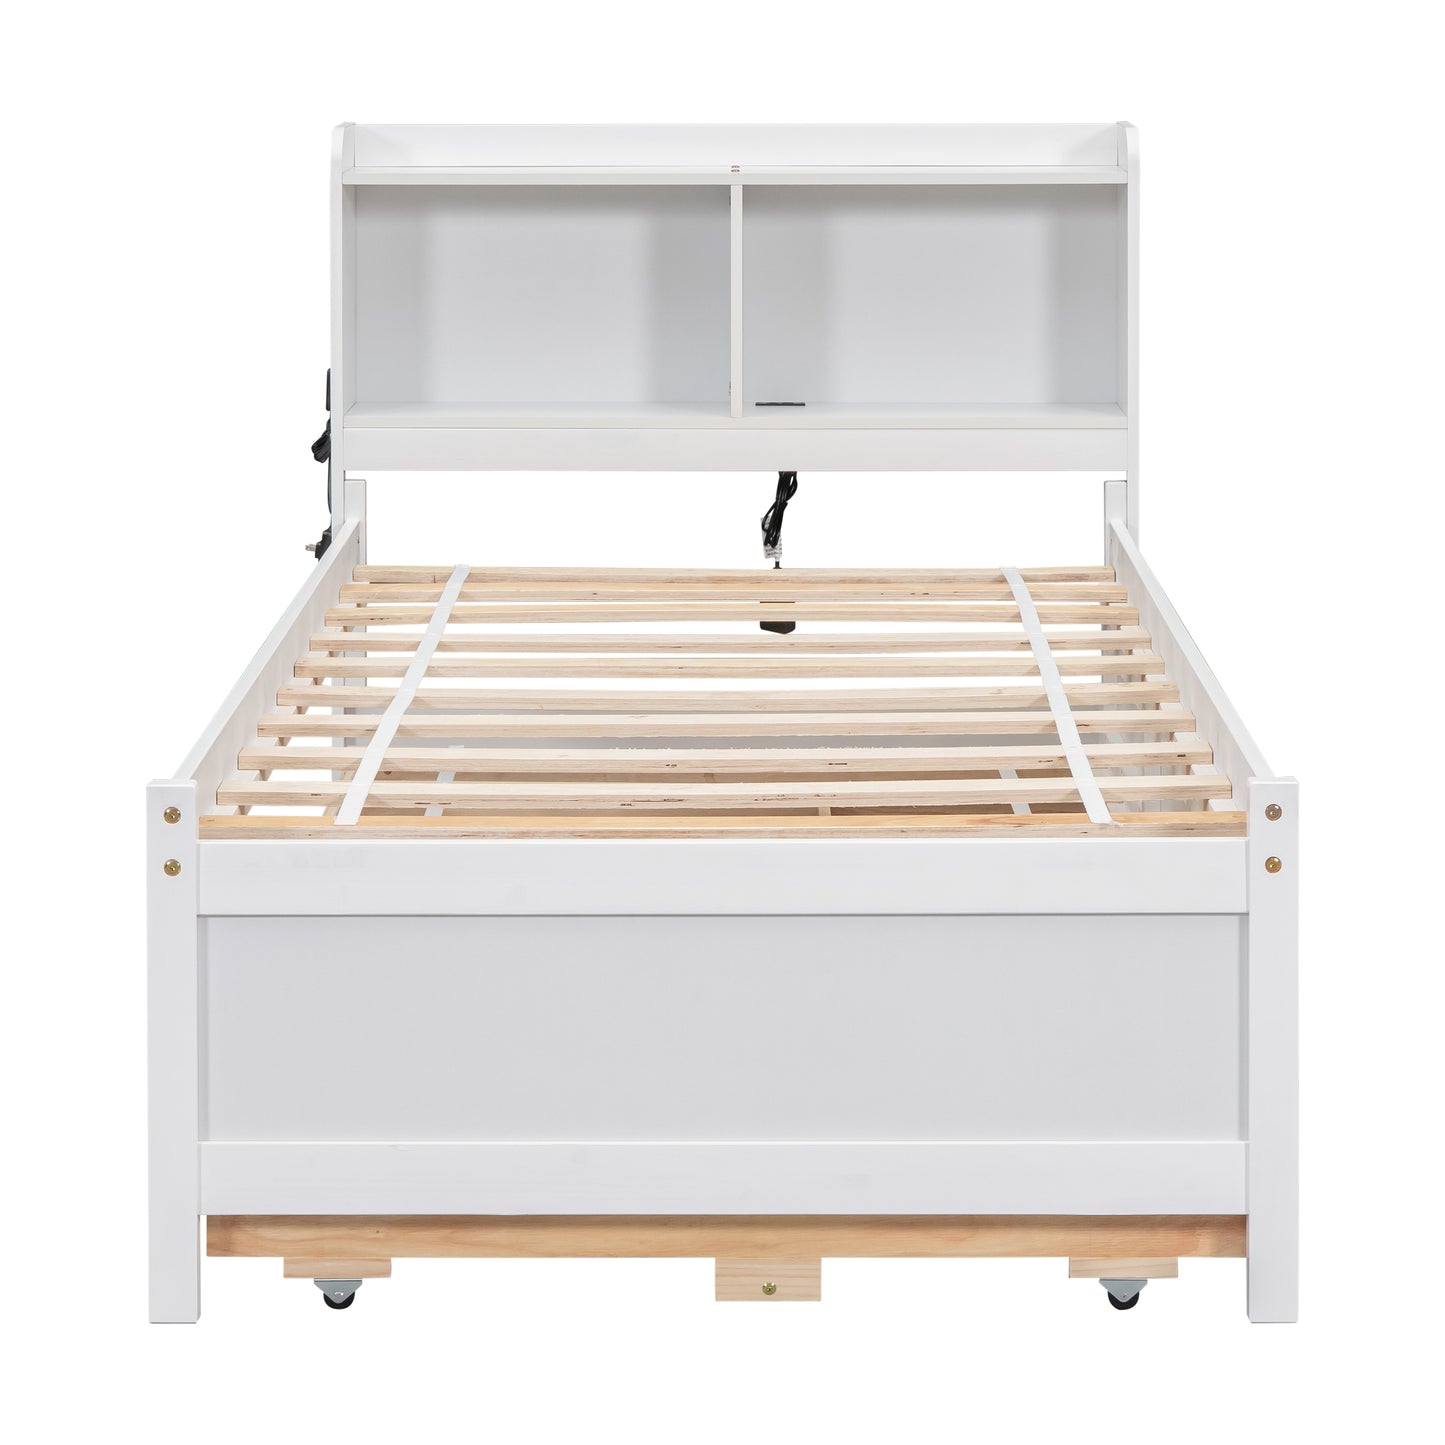 Twin Size Platform Bed with Built-in USB ,Type-C Ports, LED light, Bookcase Headboard, Trundle and 3 Storage Drawers, White